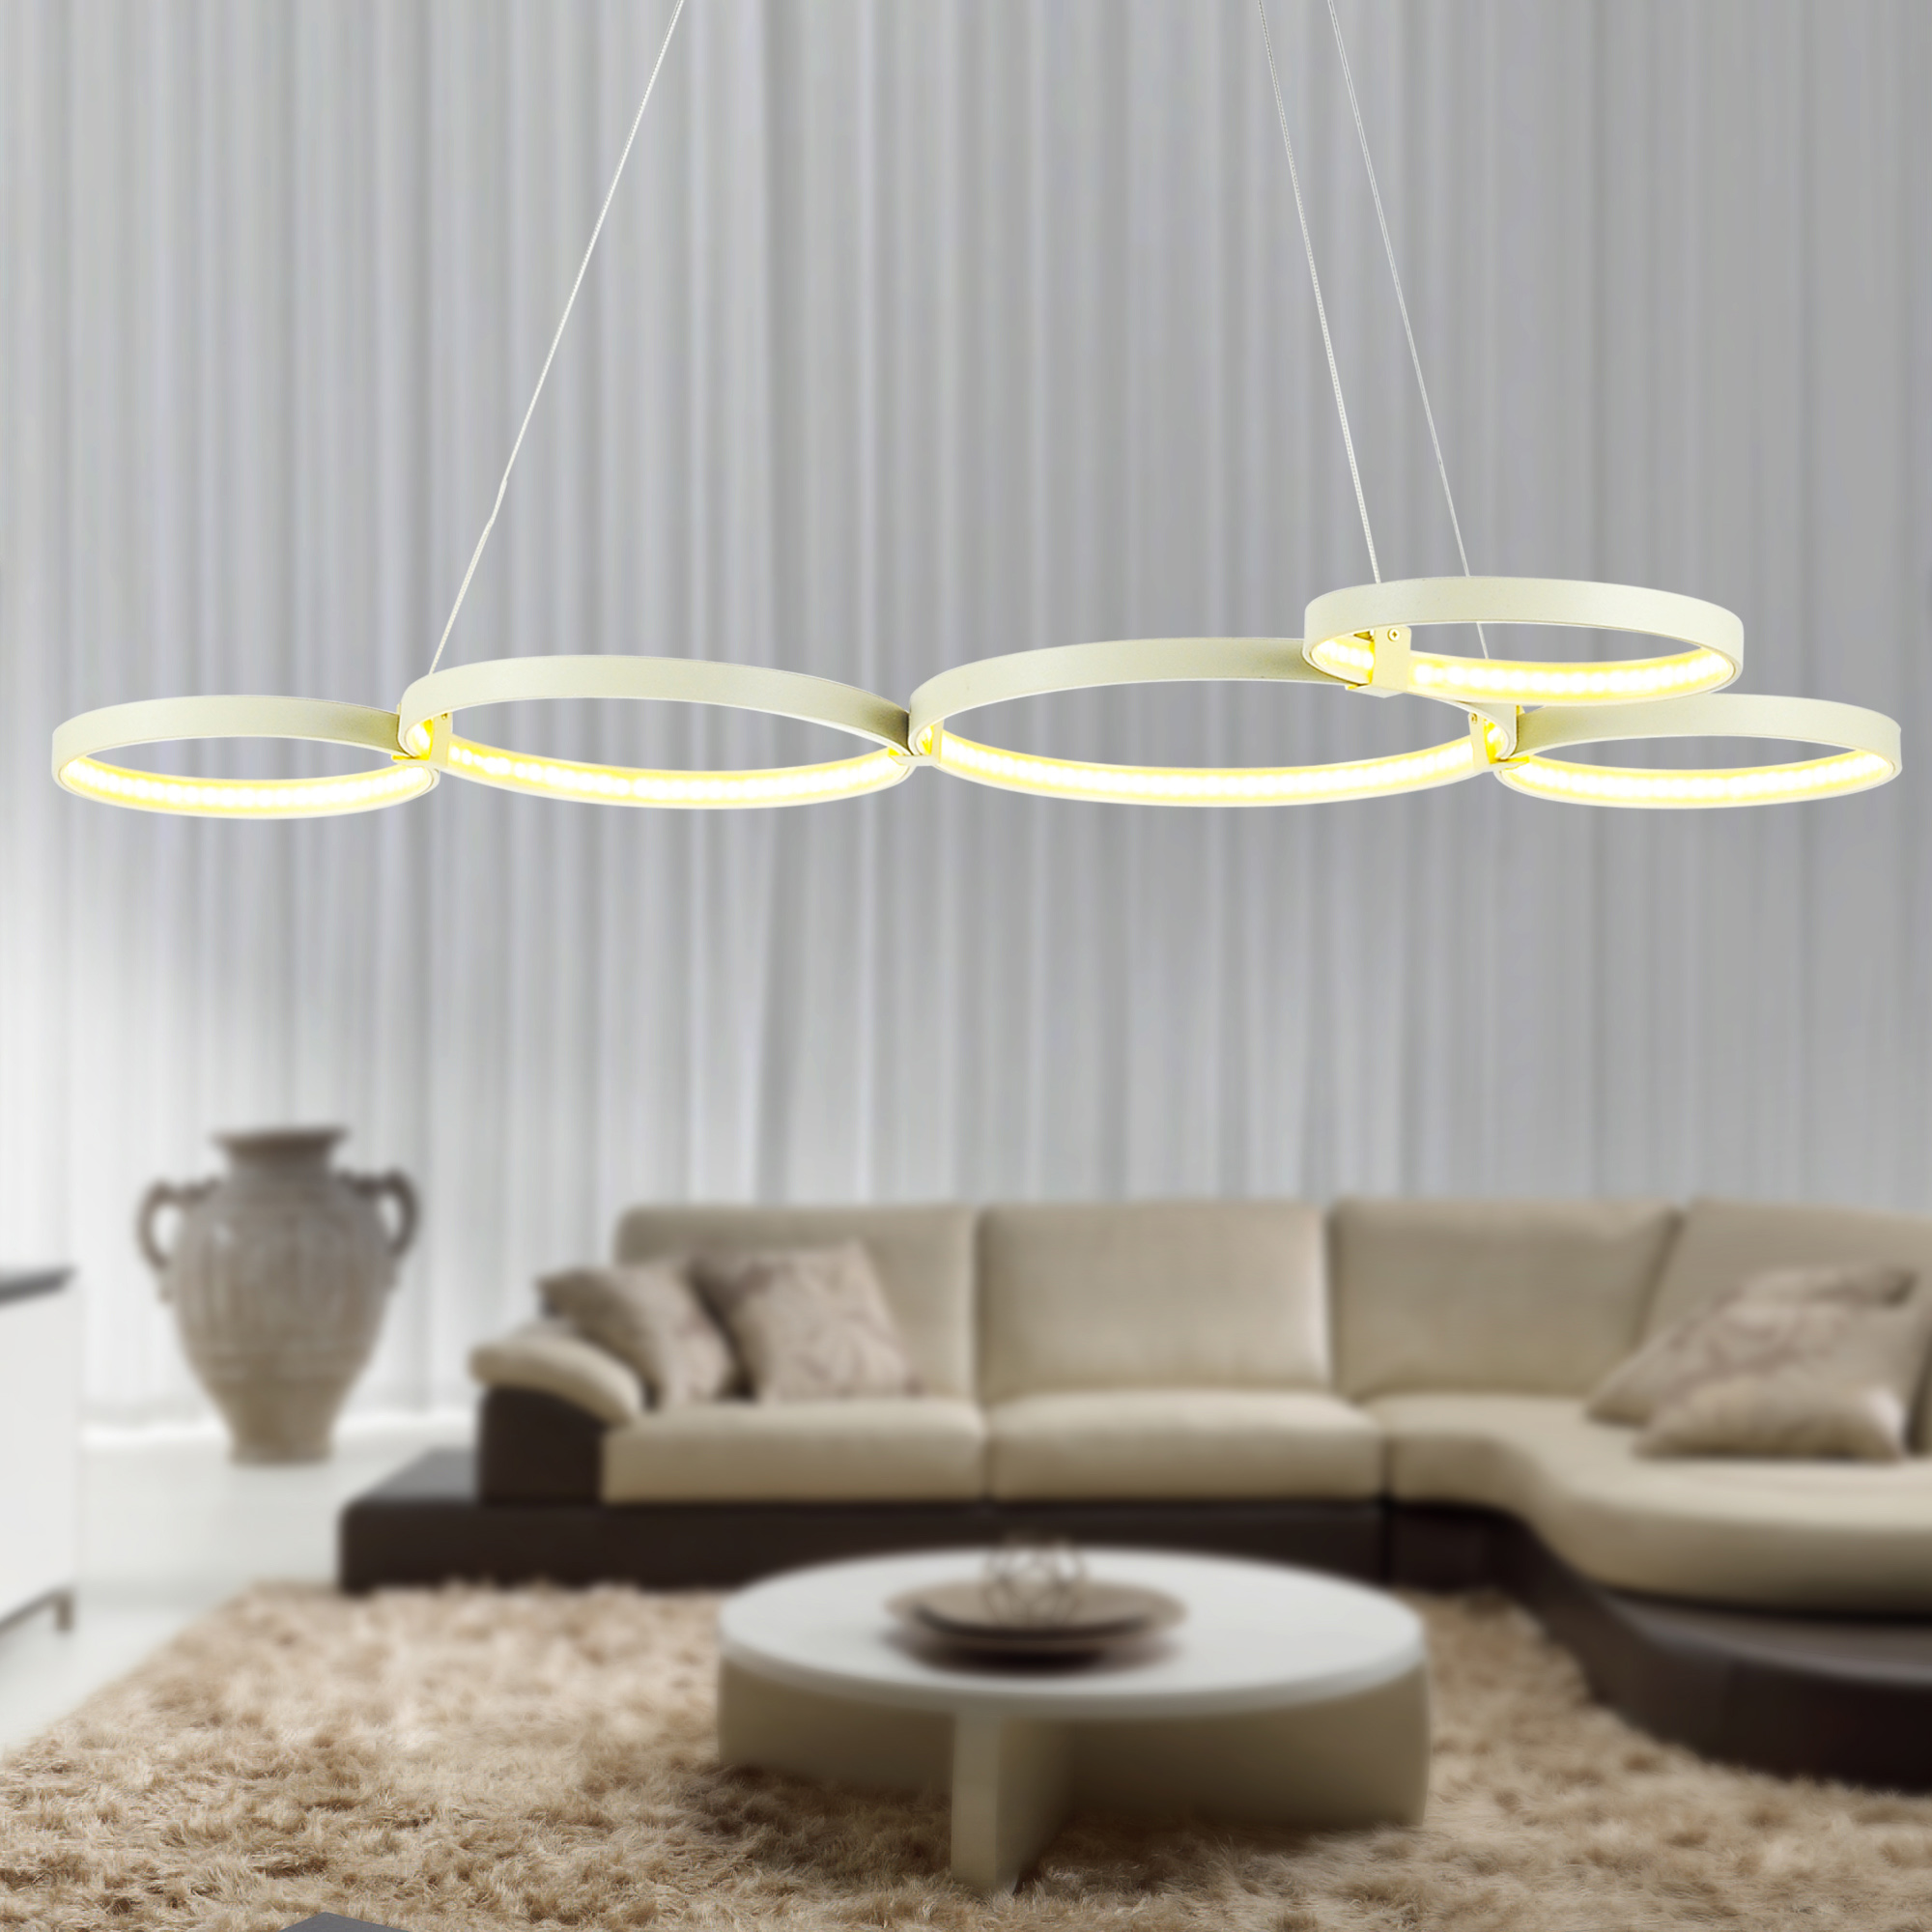 Imperio White 5-Light LED Pendant with Yellow Shade (Adjustable Height)